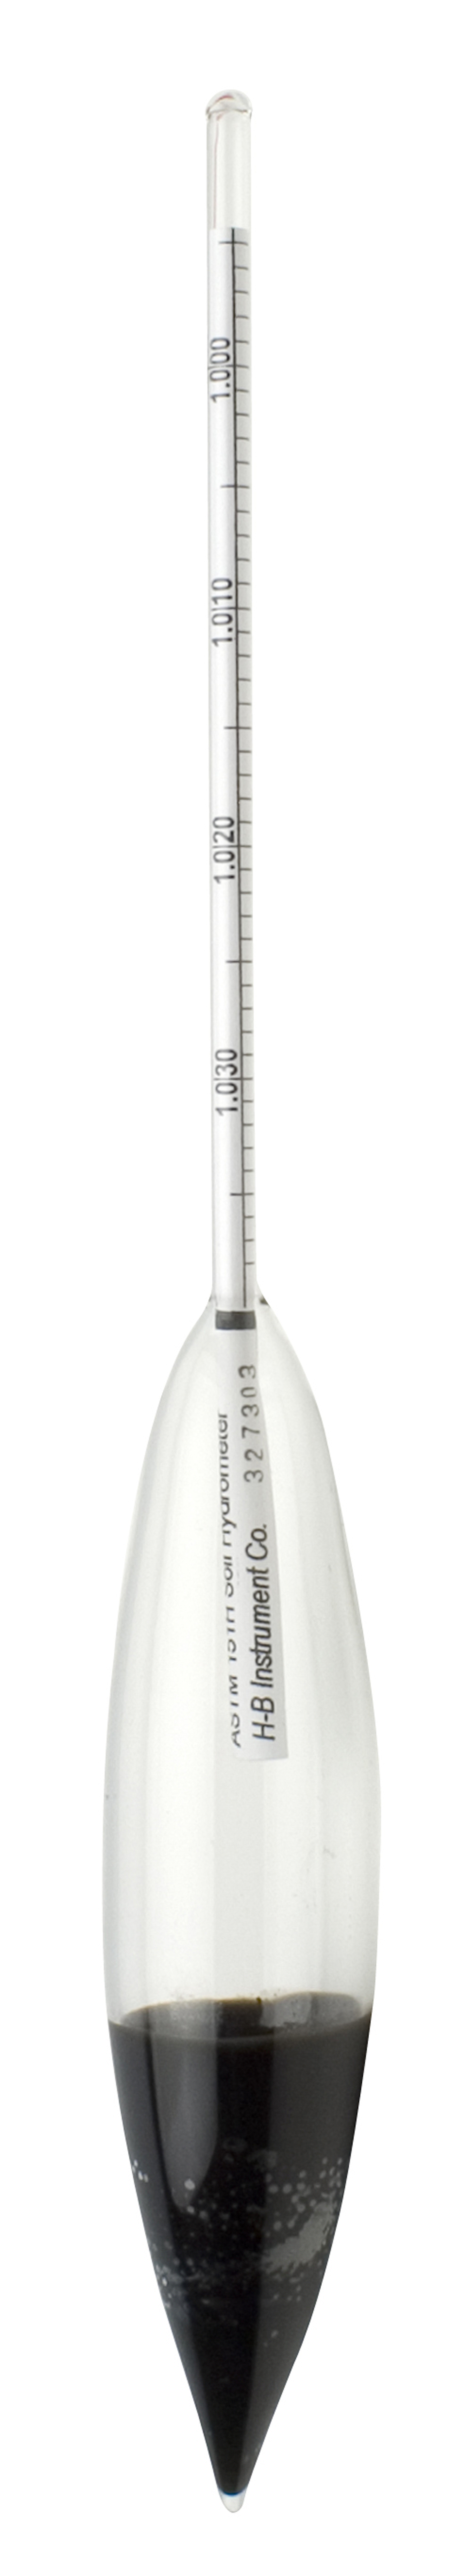 H-B DURAC Soil Analysis ASTM Hydrometers; Traceable to NIST